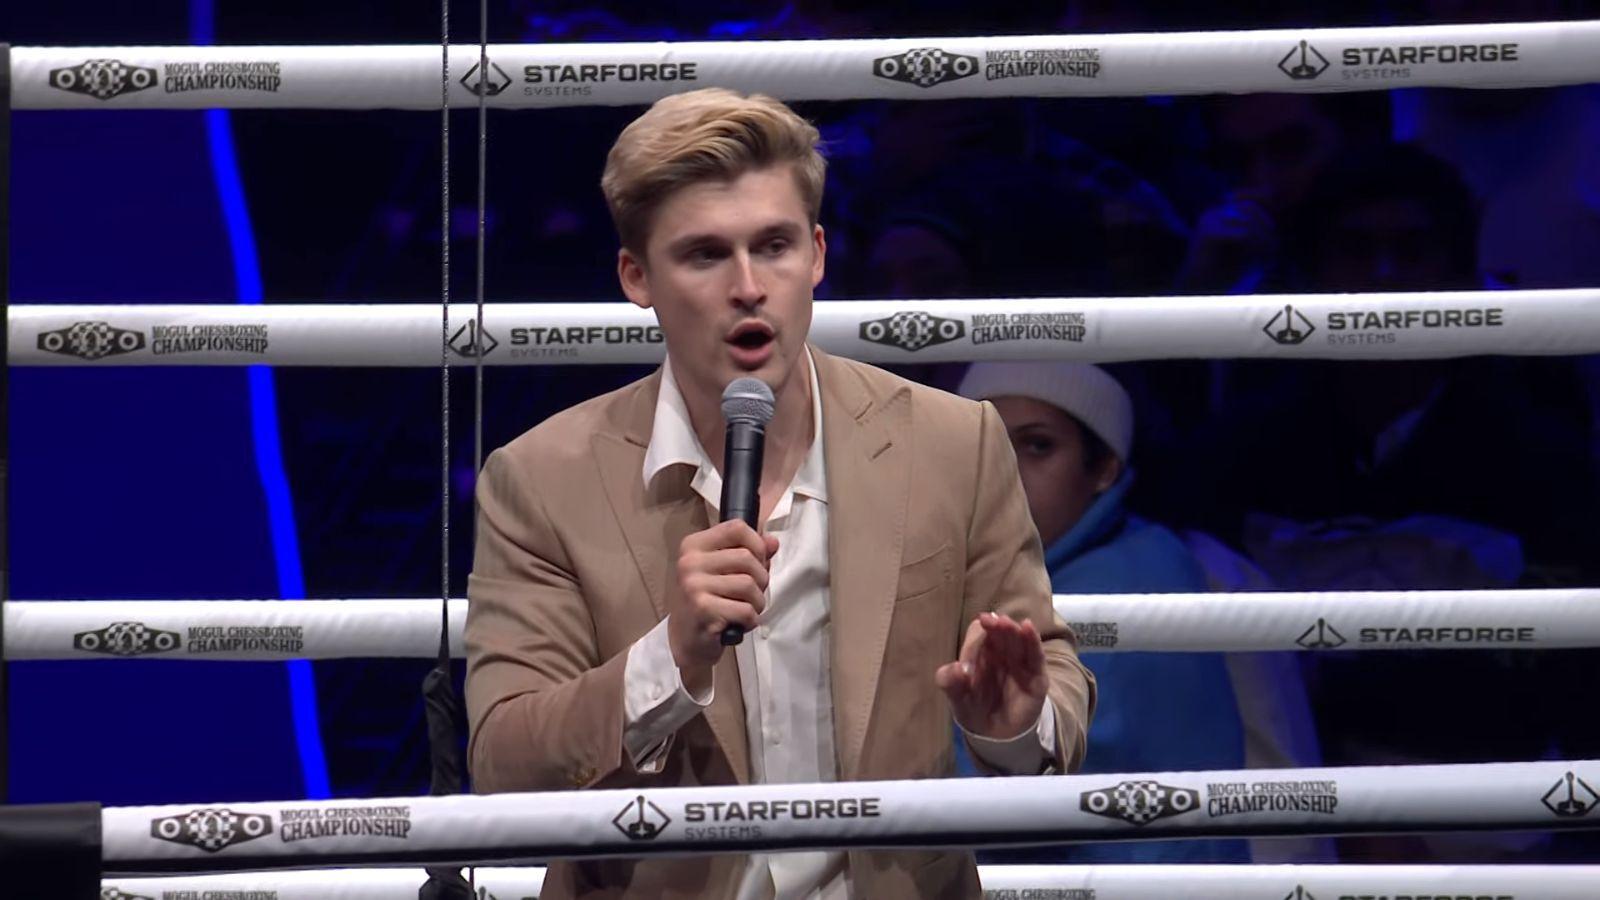 Ludwig breaks all-time viewership record with Mogul Chessboxing  Championship event - Dexerto